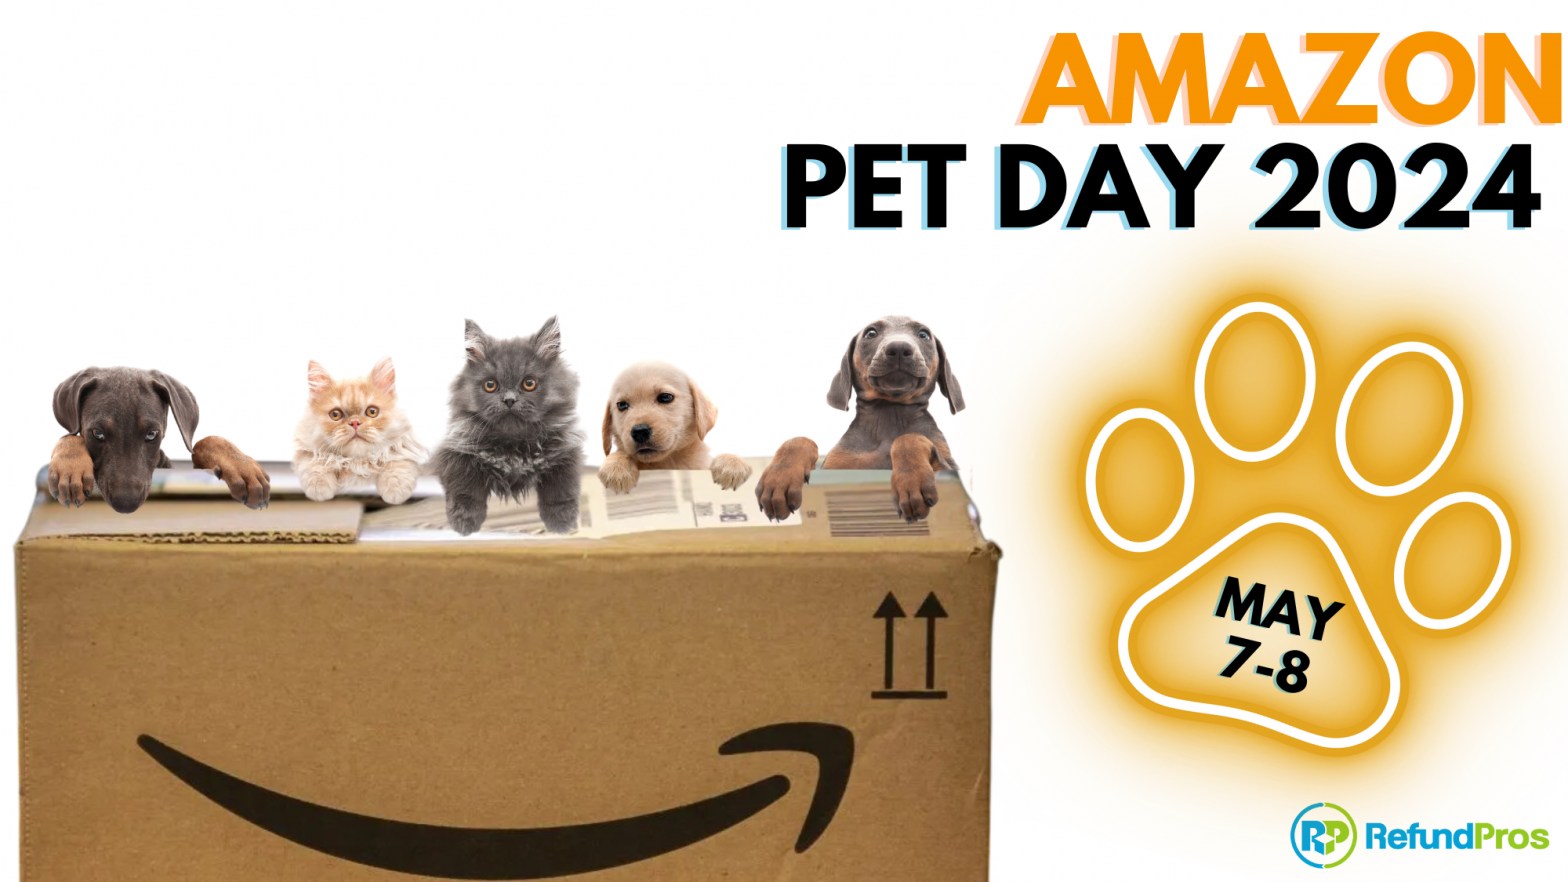 Puppies and kittens with an Amazon box.